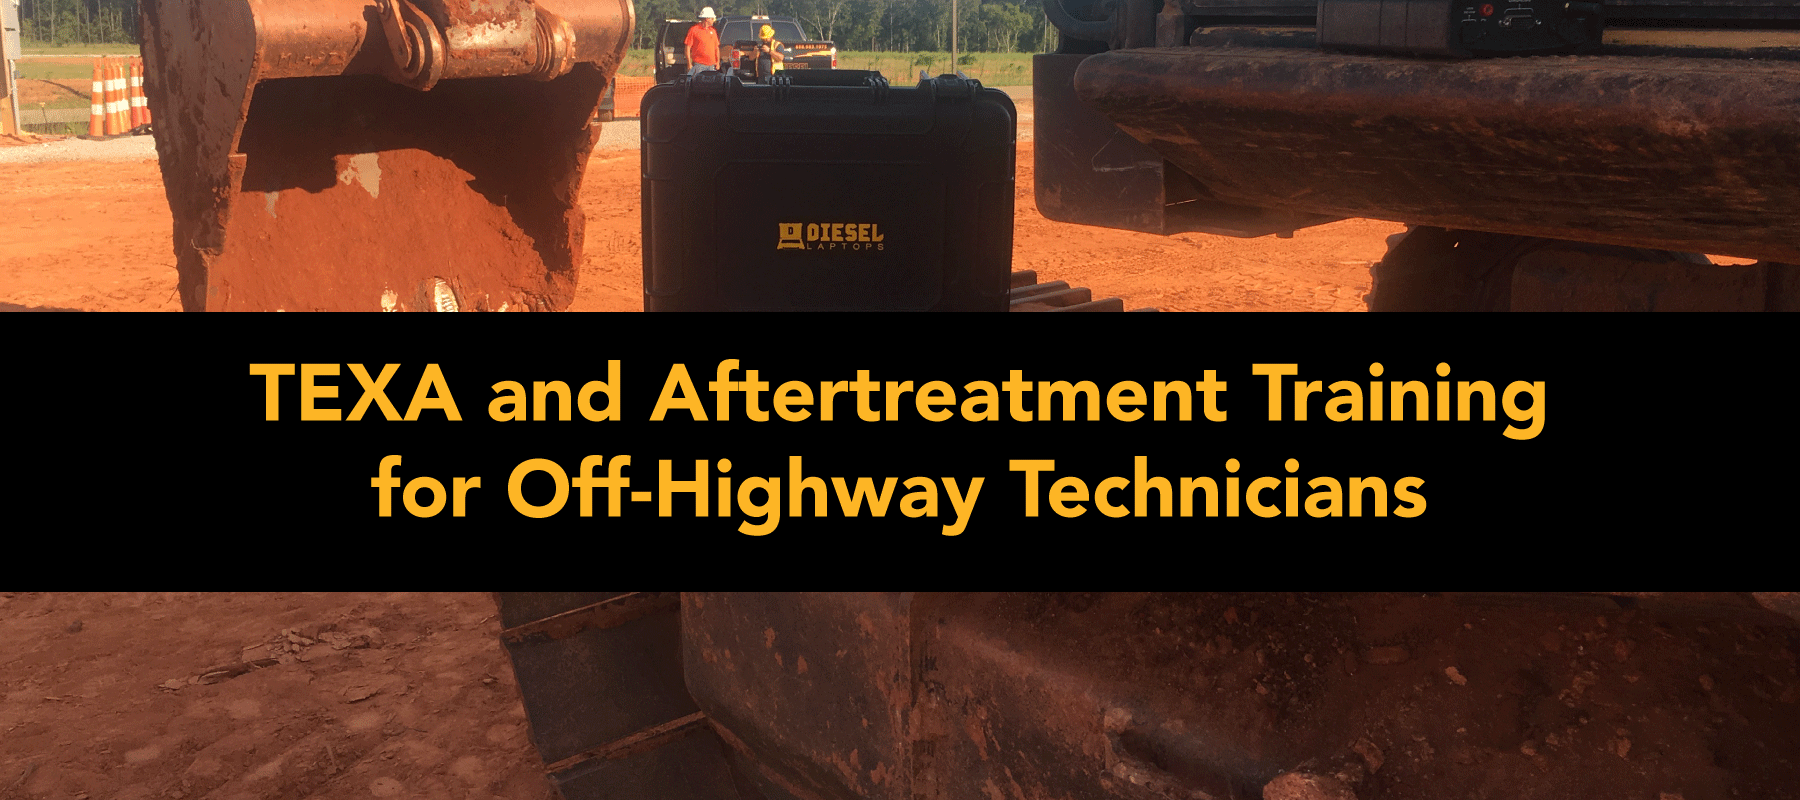 Off-Highway TEXA and Aftertreatment Training